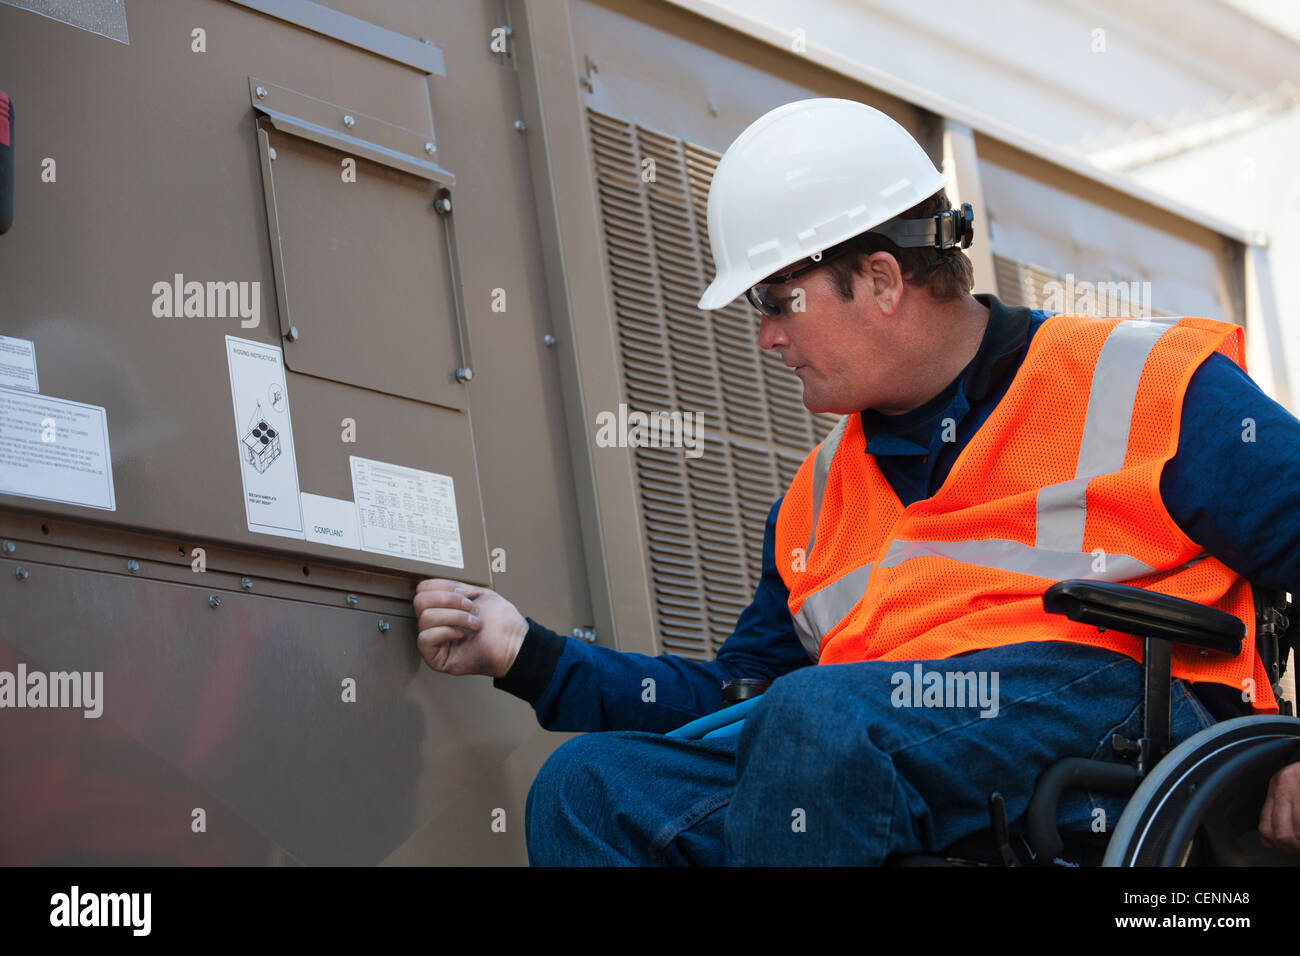 Facilities engineer in a wheelchair opening inspection plate of commercial air conditioning system Stock Photo